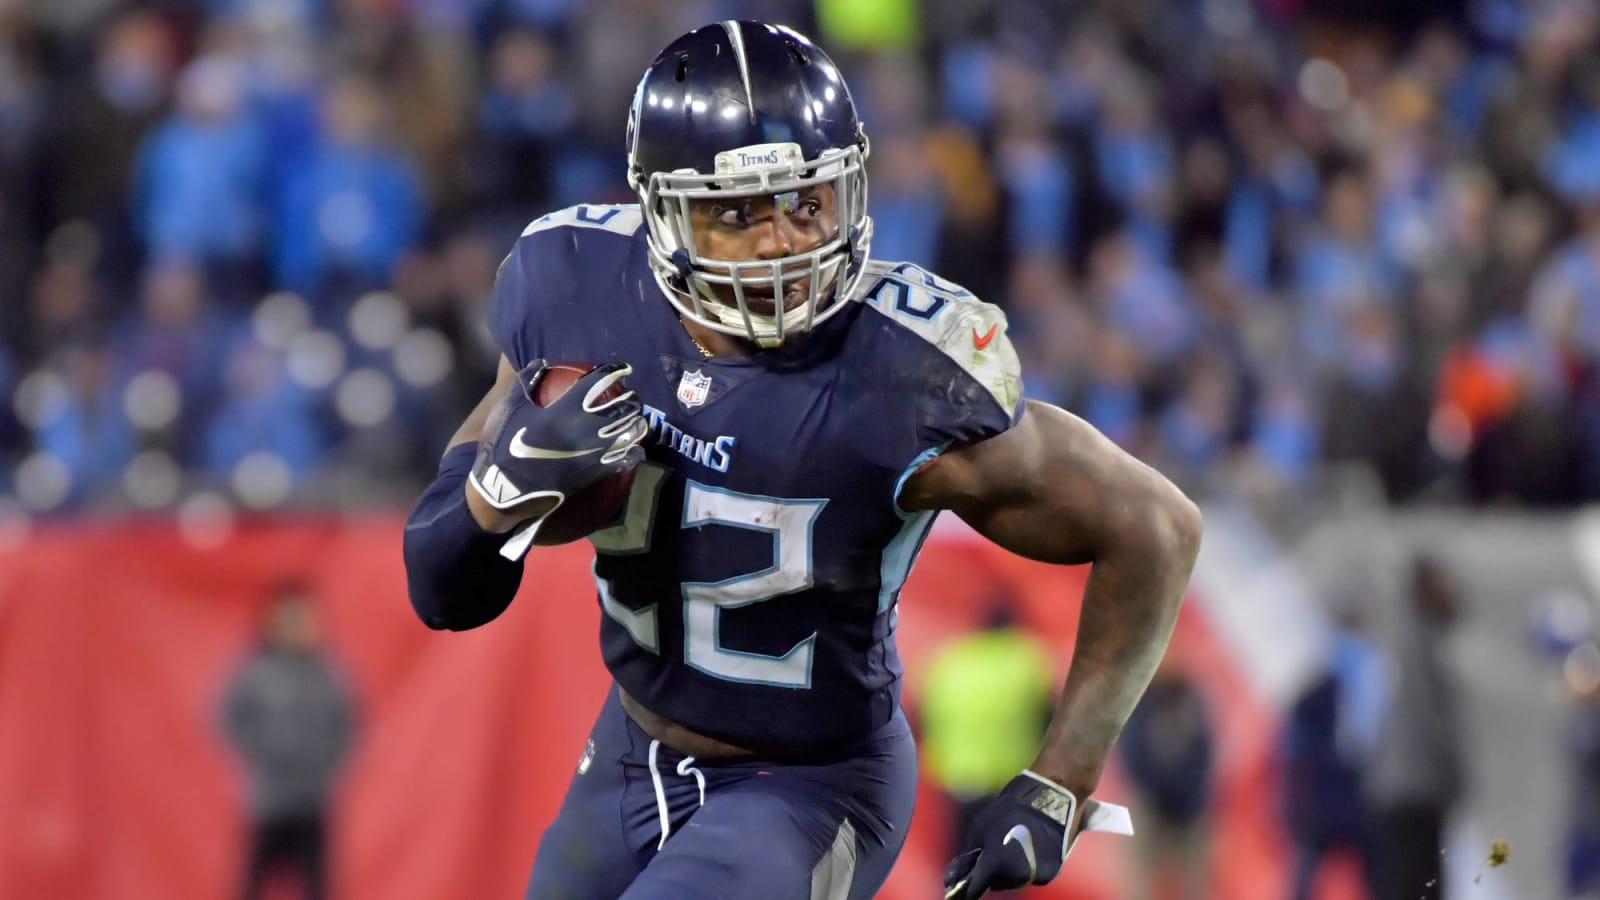 French announcer calling Derrick Henry's 99-yard TD loses his mind, and it's brilliant